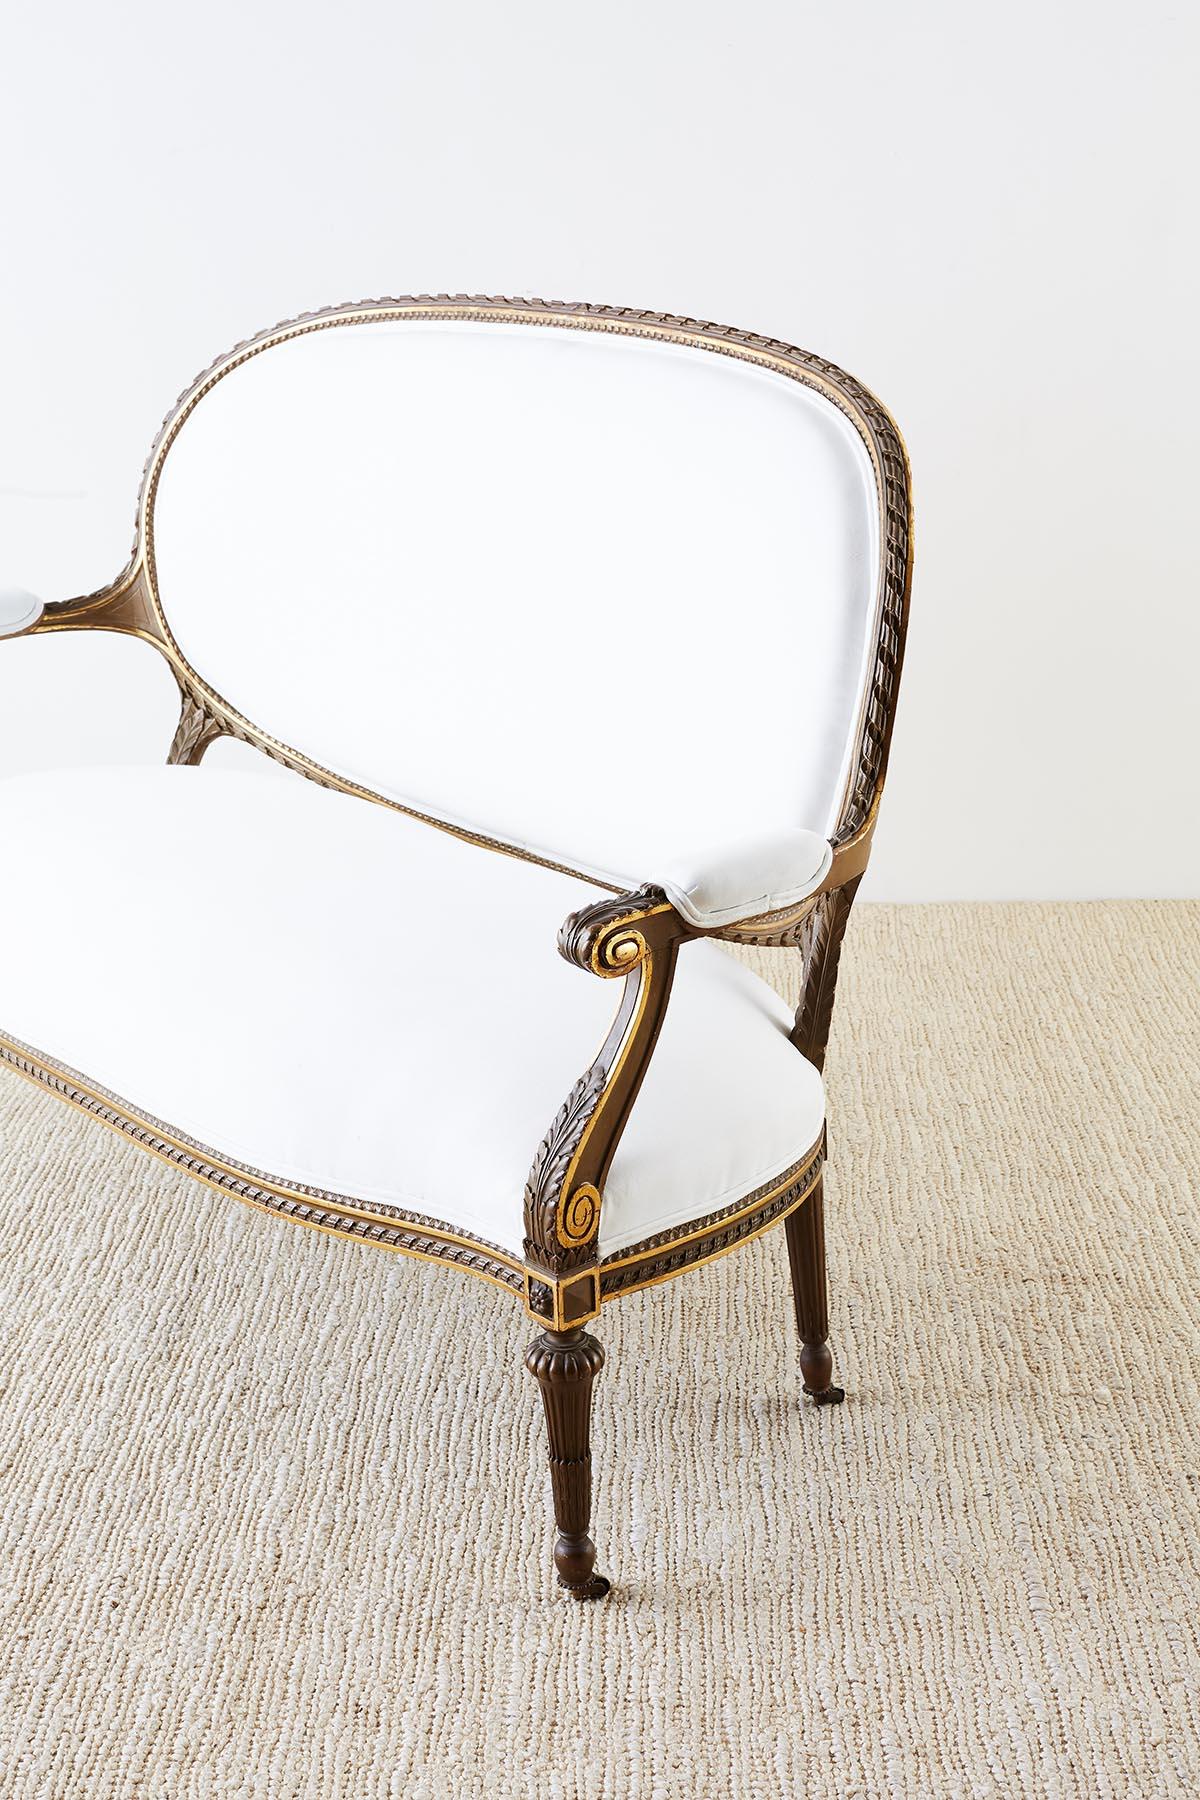 Giltwood 19th Century French Louis XVI Style Neoclassical Canapé Settee